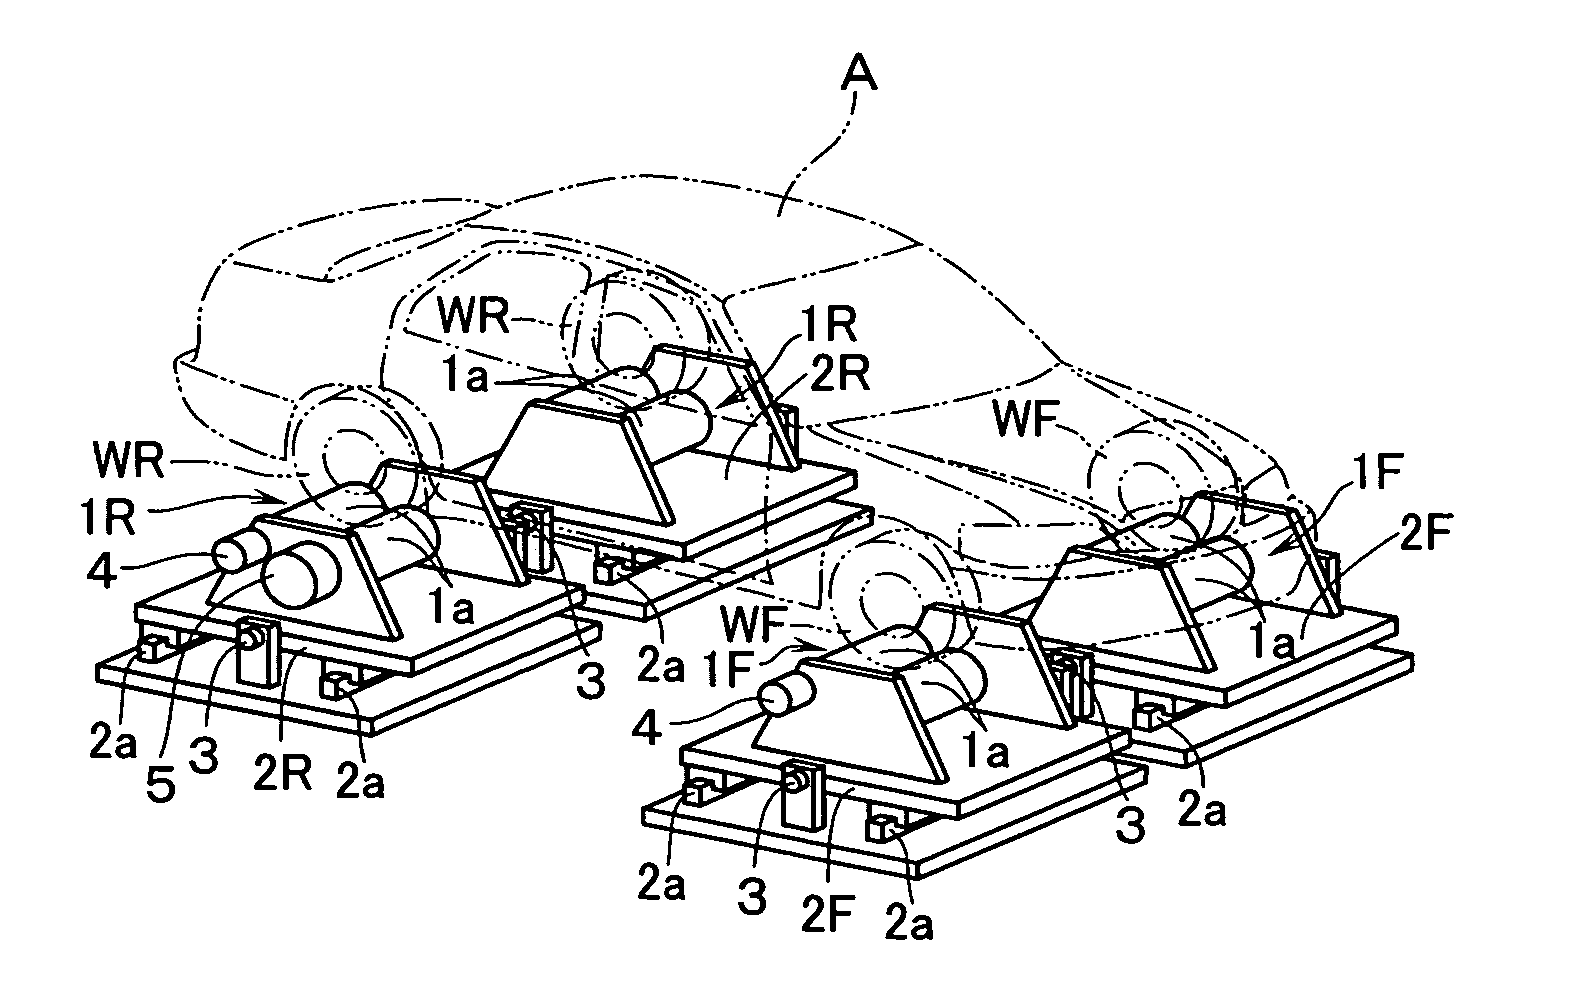 Method of measuring unilateral flow rate of vehicles